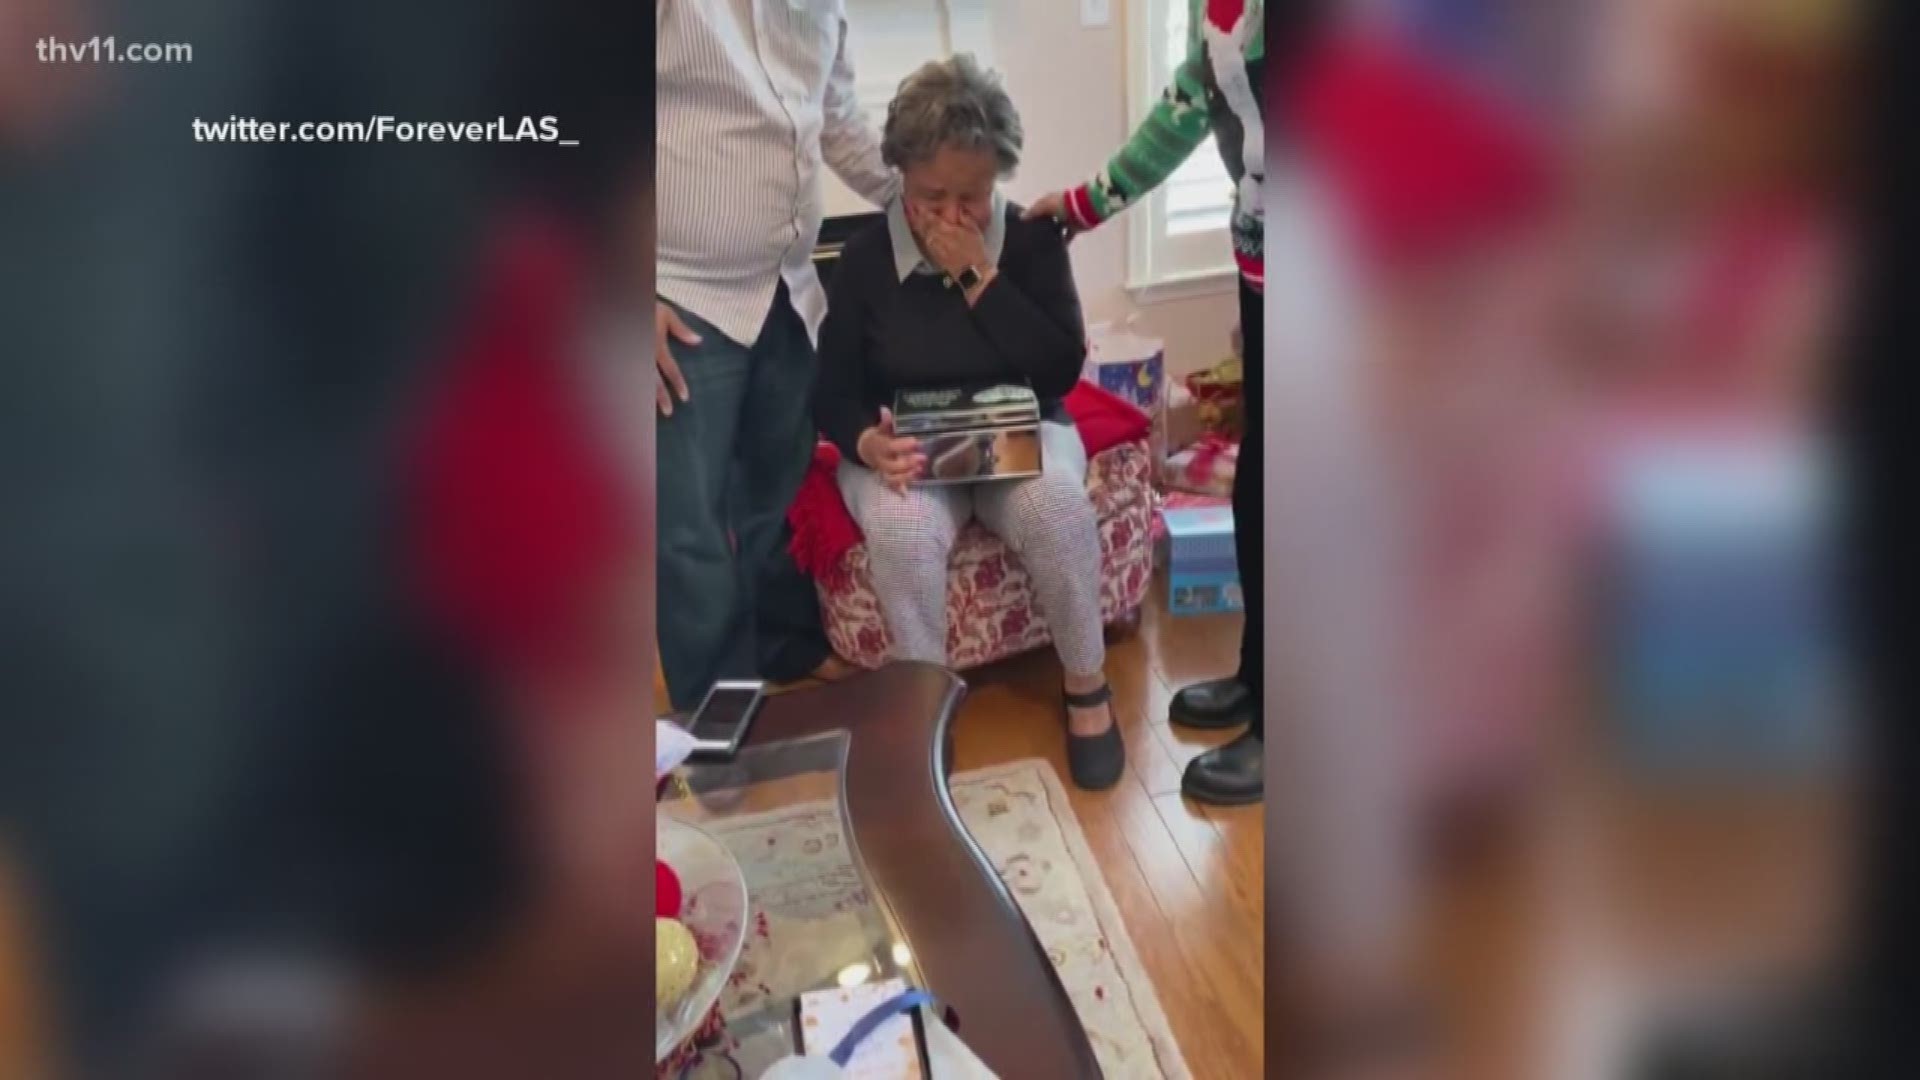 In a video with nearly 10 million views on twitter, Lauren Shackleford posted the touching gift she and other family members gave to their grandmother.